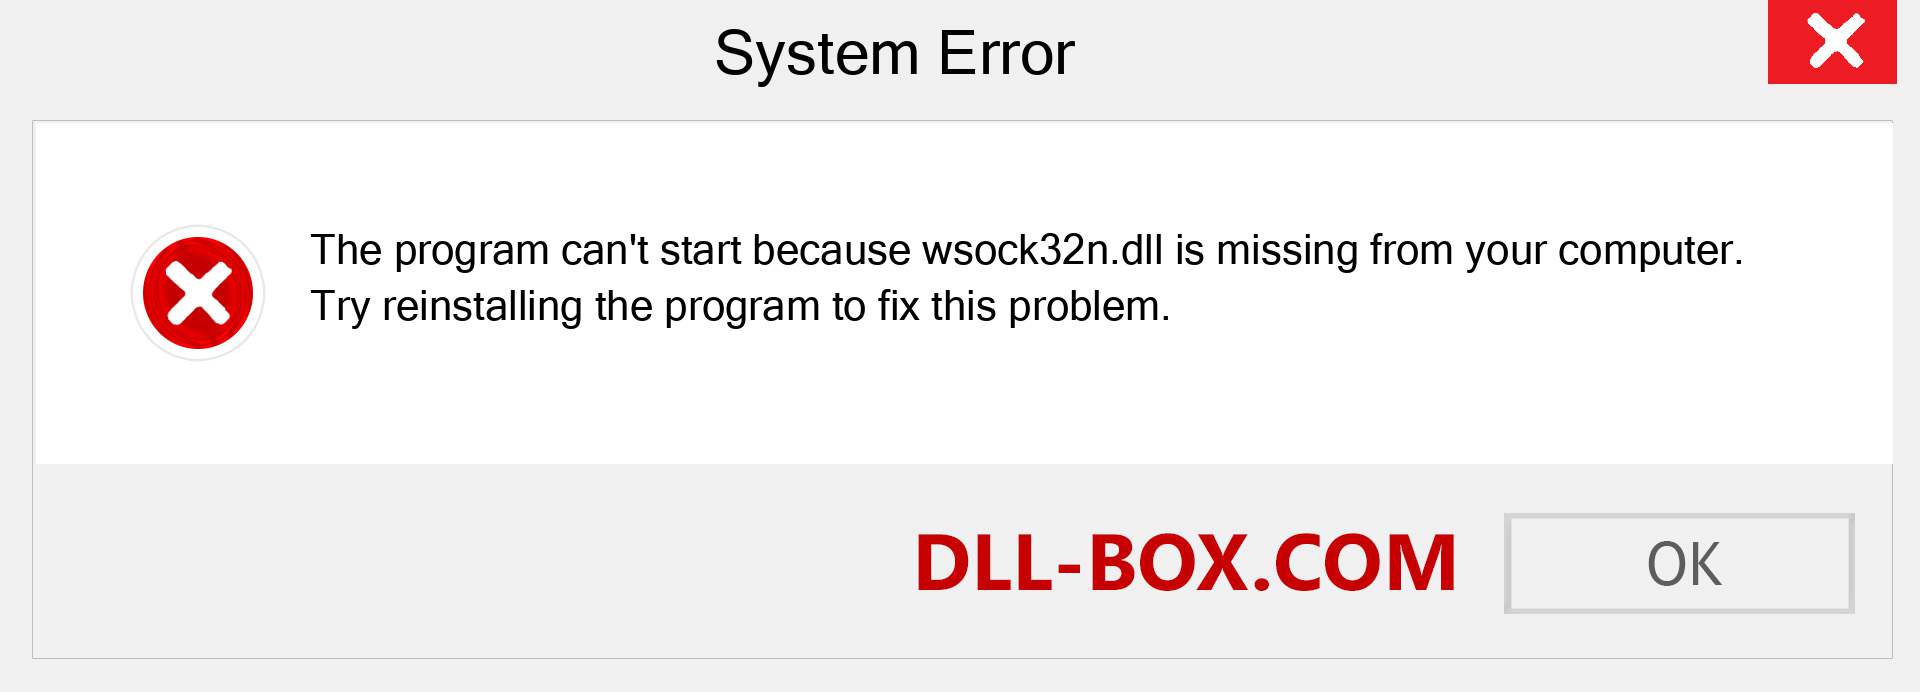  wsock32n.dll file is missing?. Download for Windows 7, 8, 10 - Fix  wsock32n dll Missing Error on Windows, photos, images